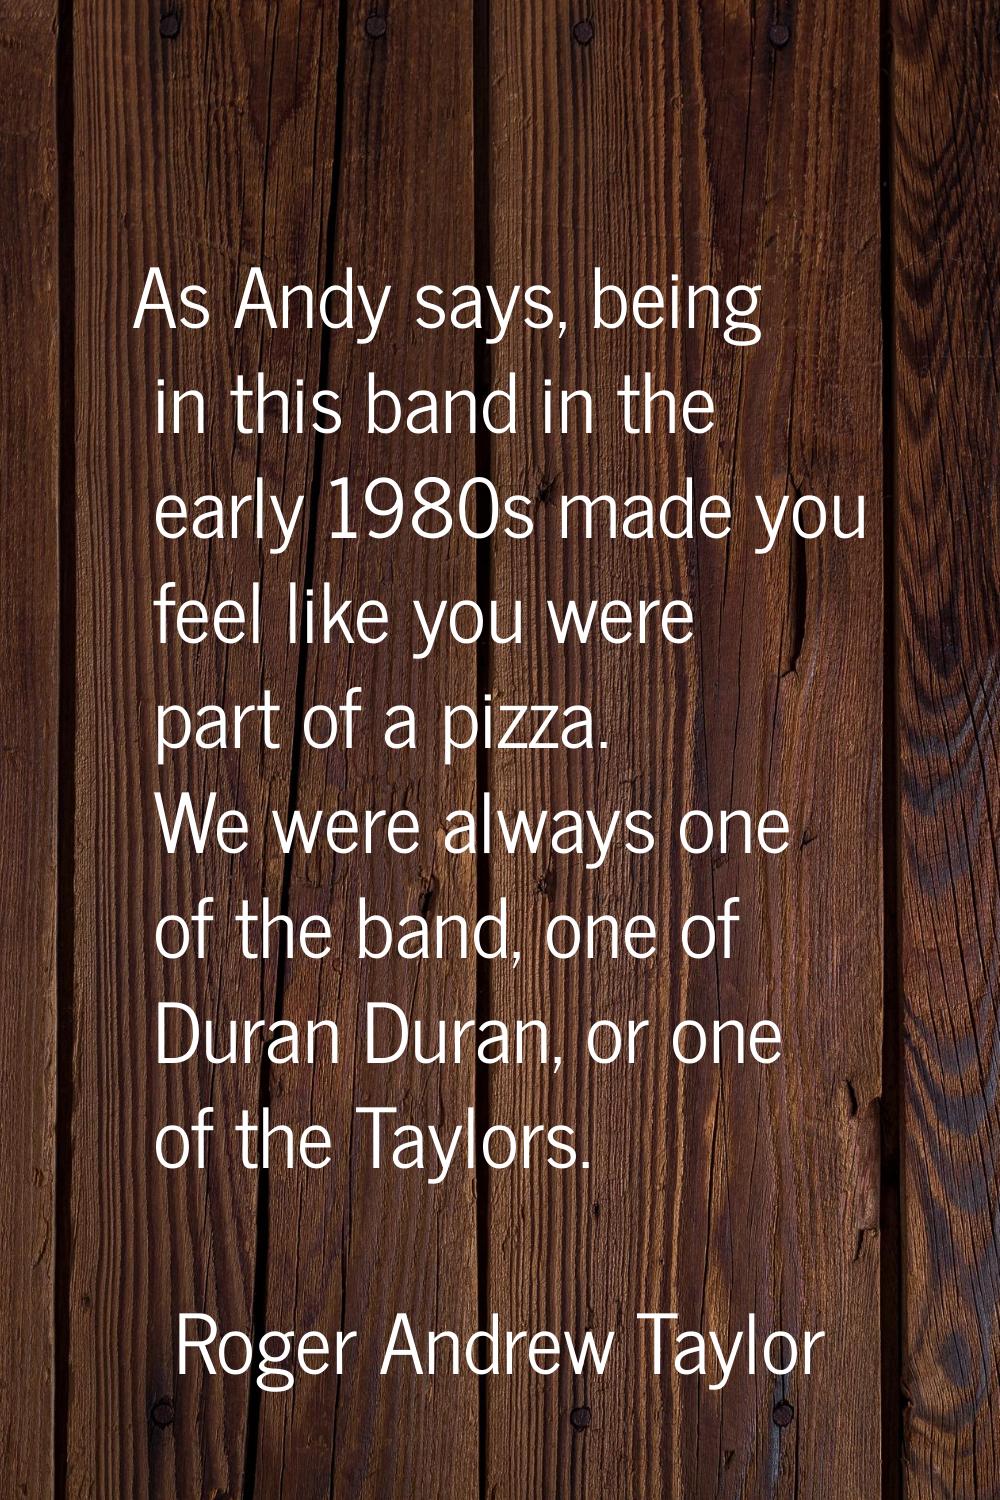 As Andy says, being in this band in the early 1980s made you feel like you were part of a pizza. We